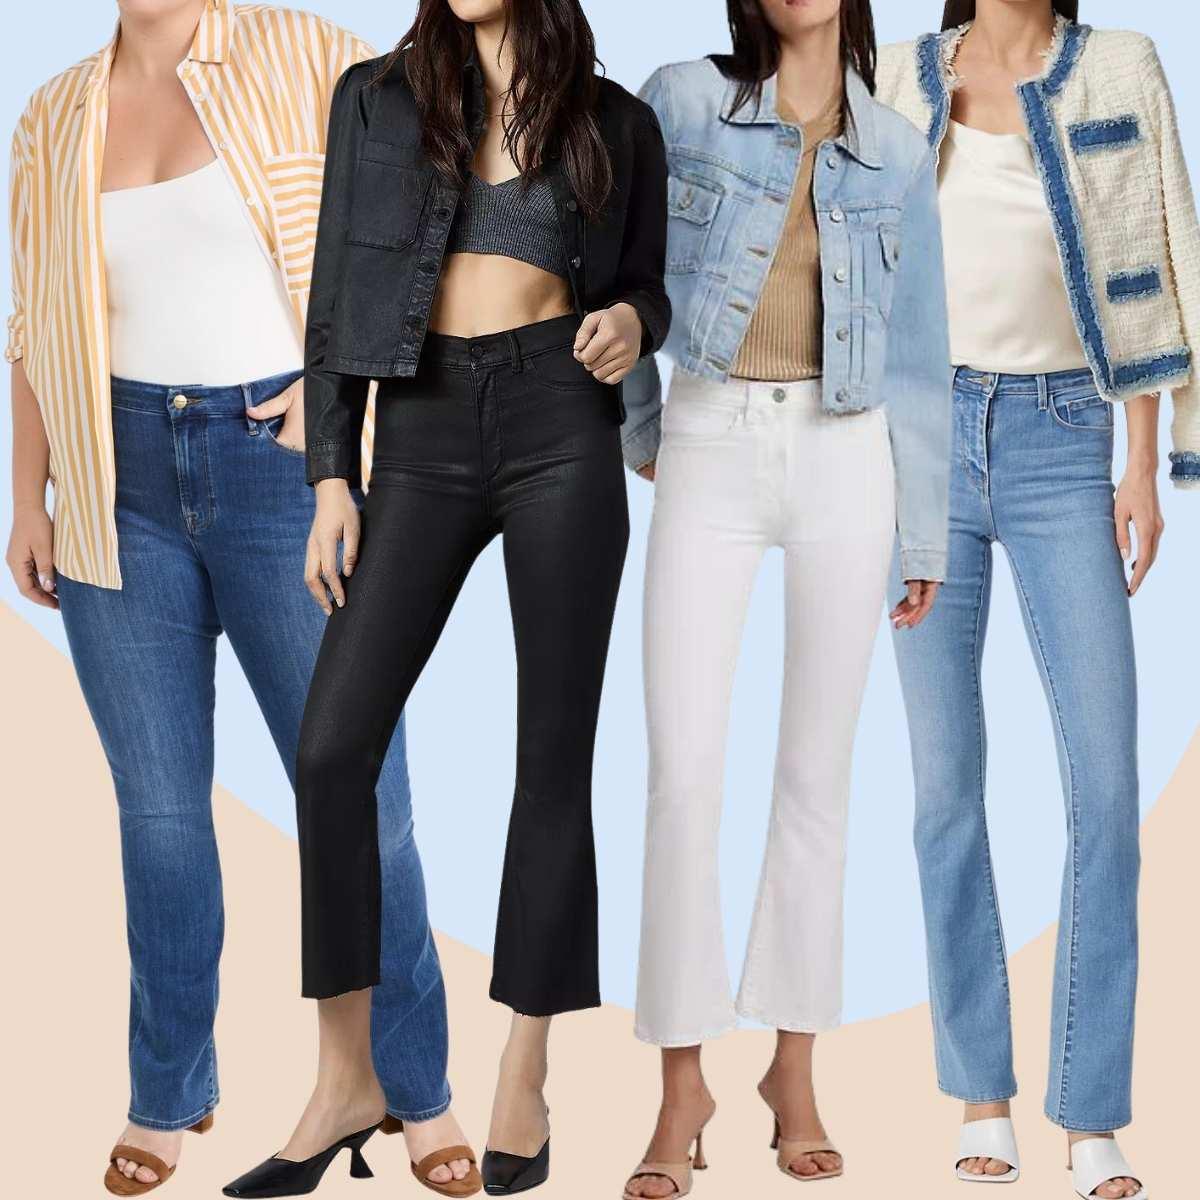 Collage of 4 women wearing slides with bootcut jeans outfits.